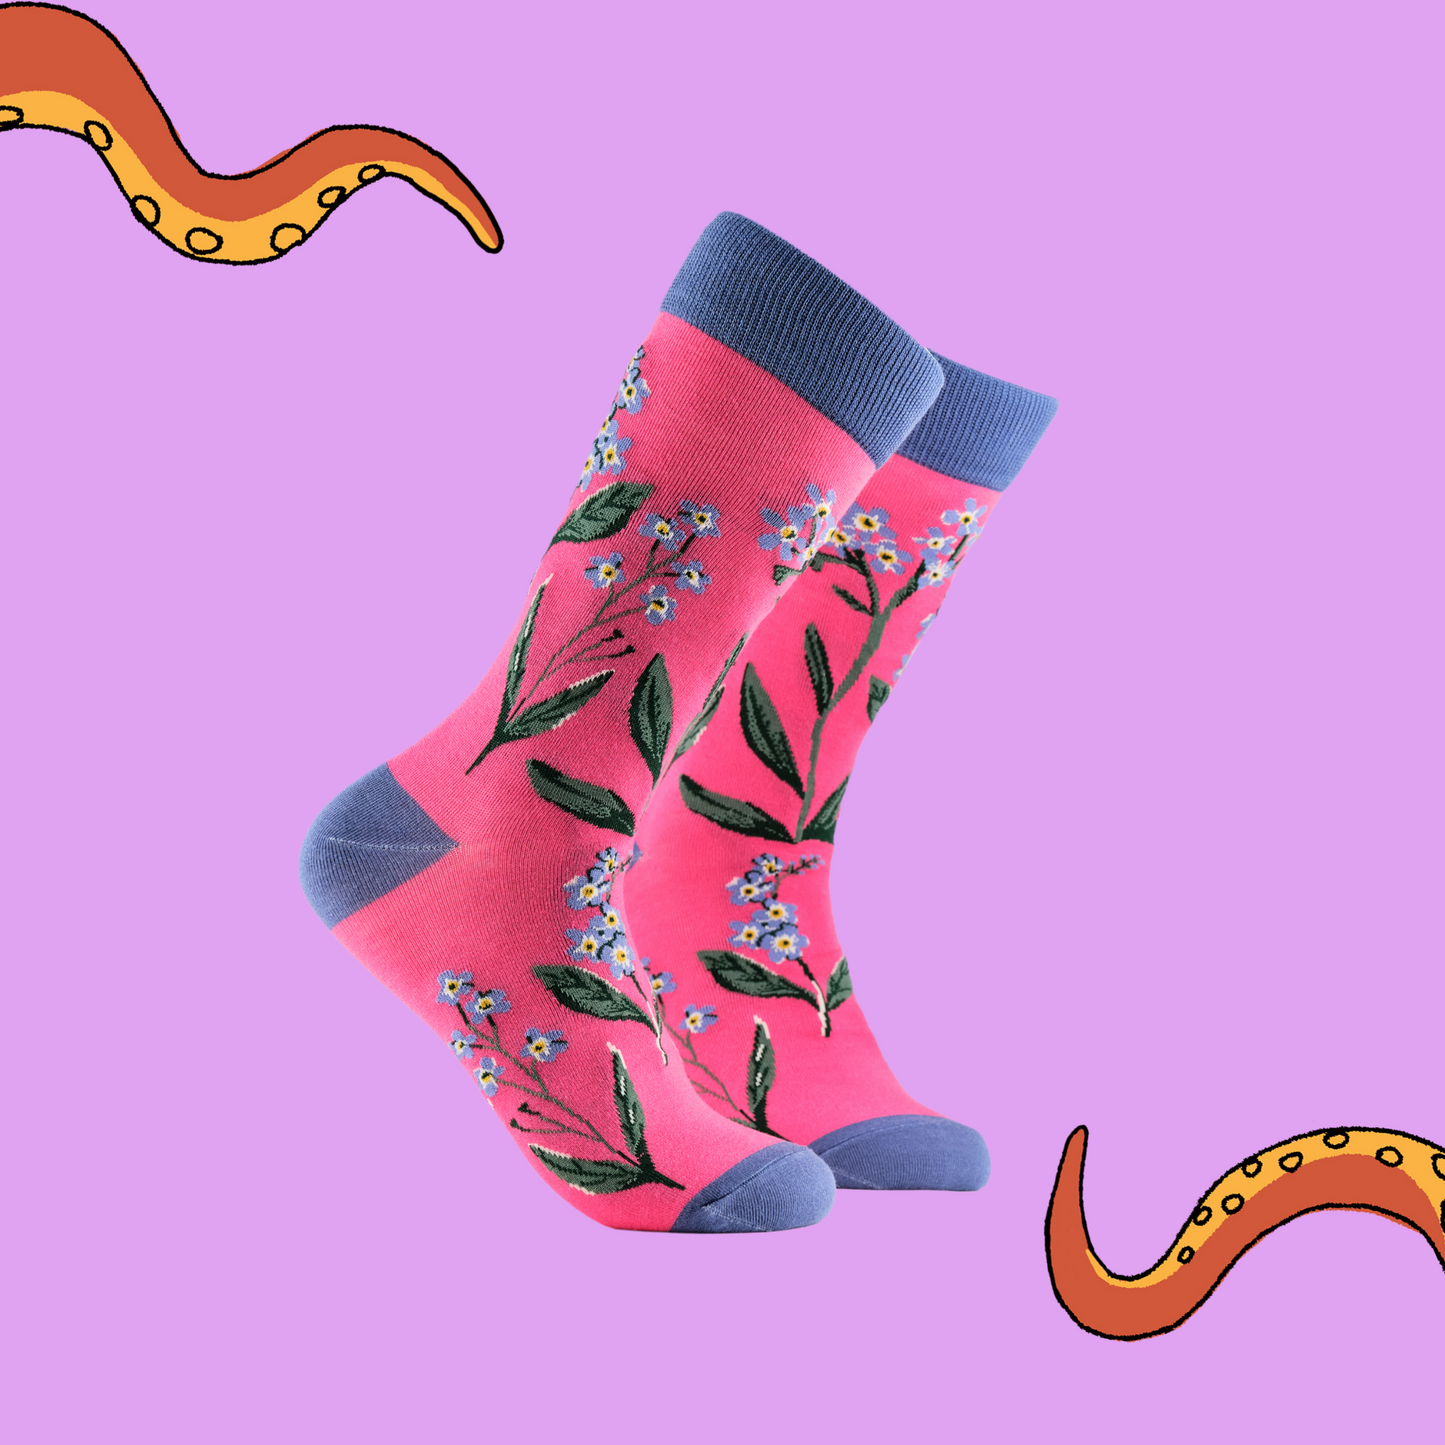 A pair of socks depicting forget me knot flowers. Pink legs, blue cuff, heel and toe.